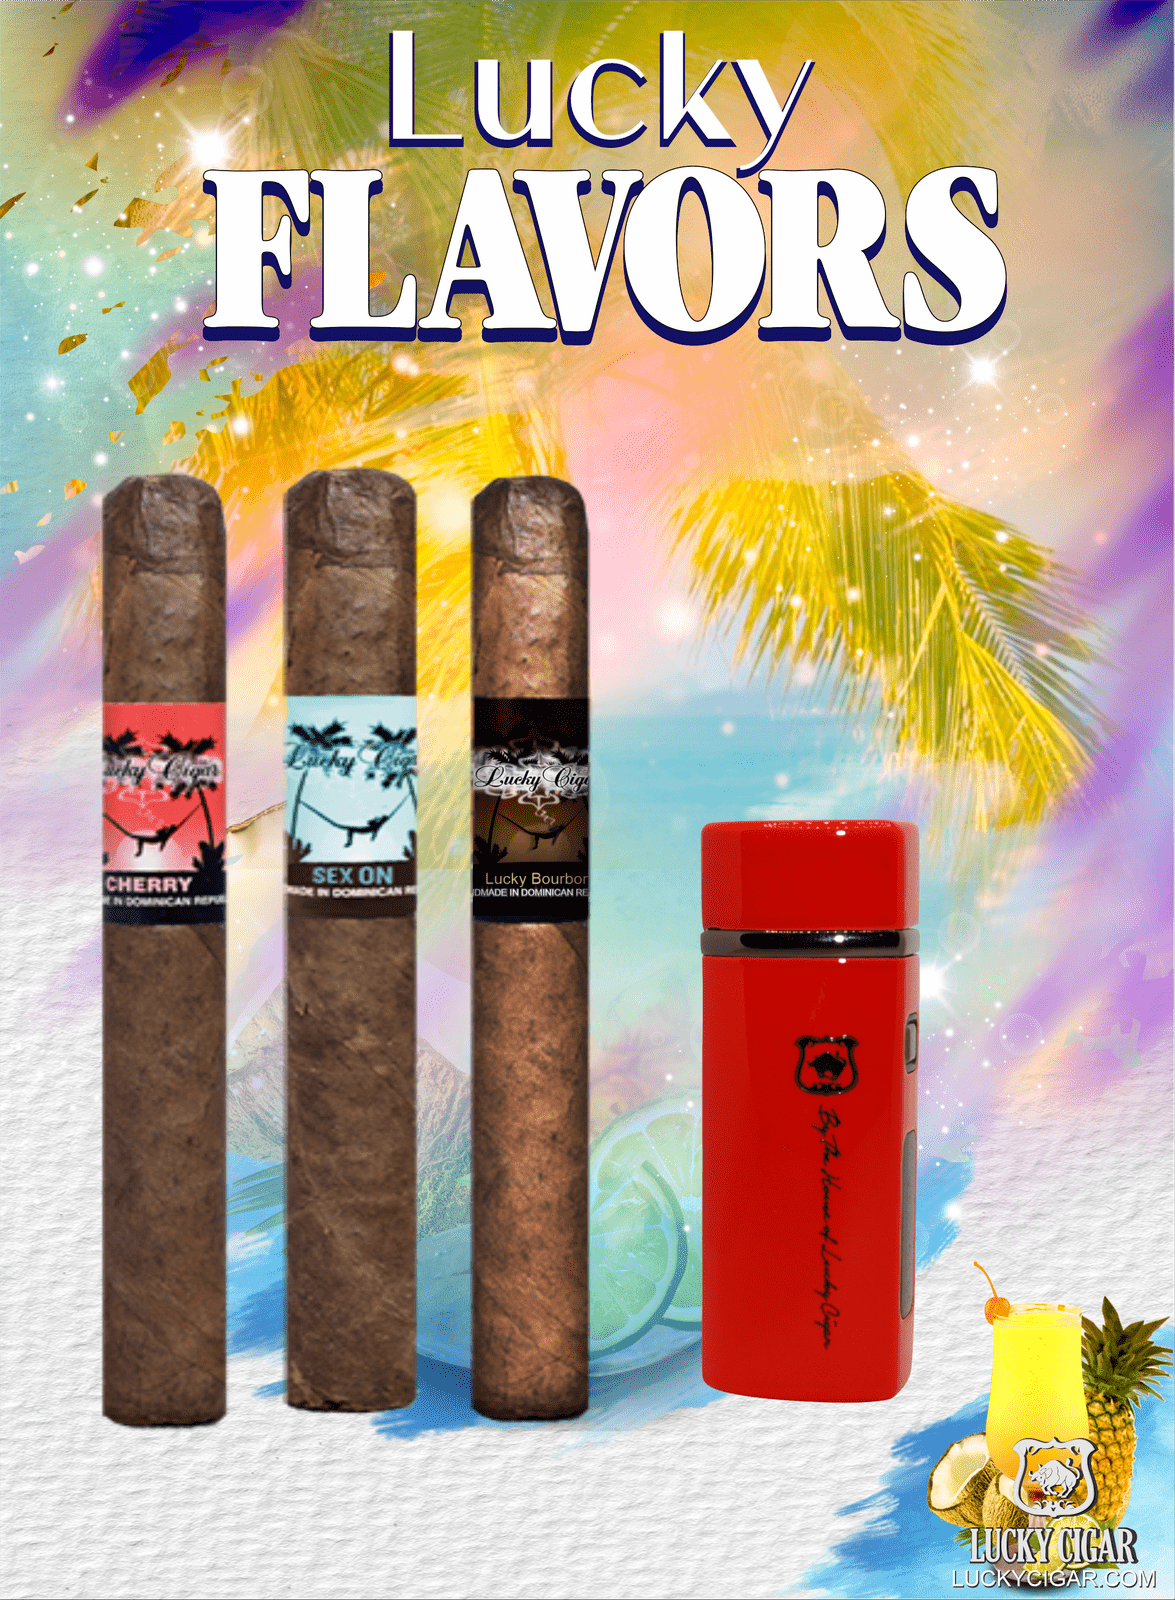 Flavored Cigars: Lucky Flavors 3 Cigar Set - Cherry, Bourbon, Beach with Torch Lighter